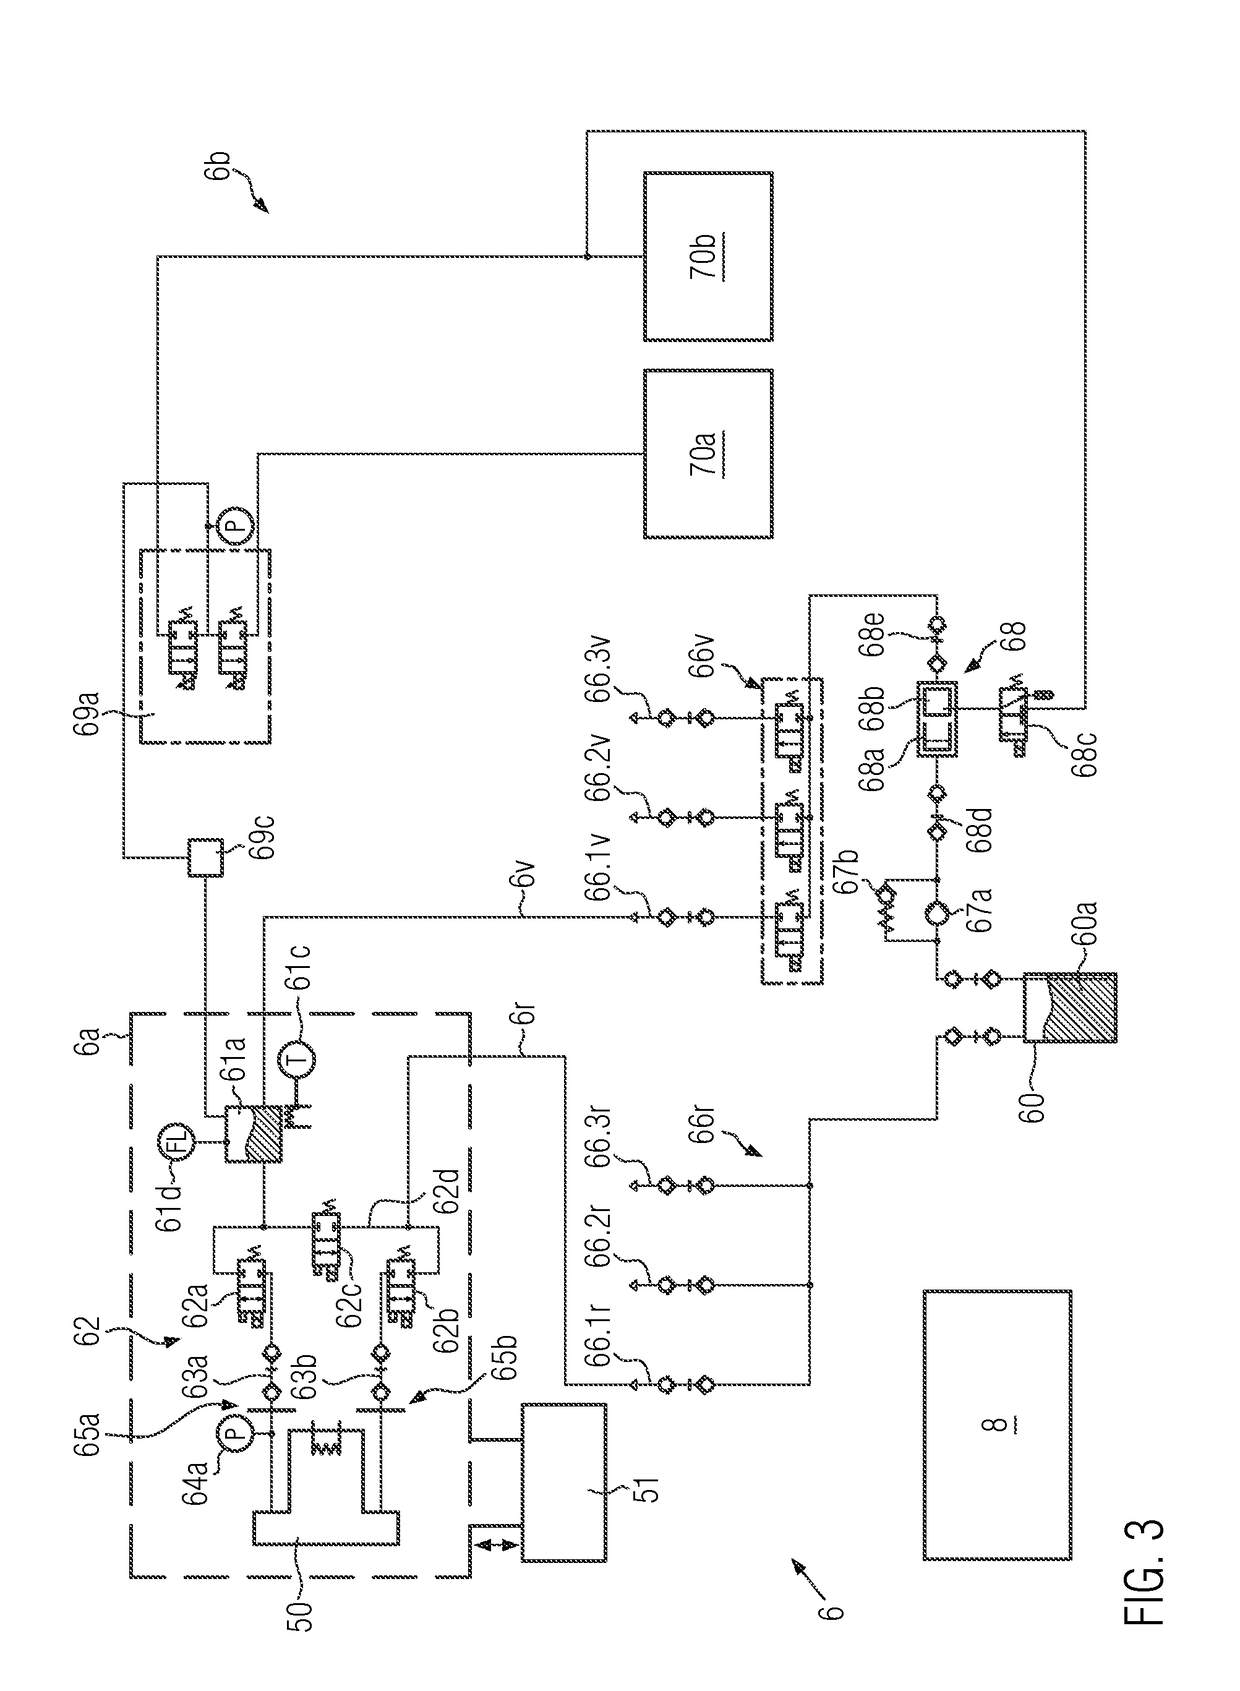 Direct printing machine and method for printing containers with direct printing